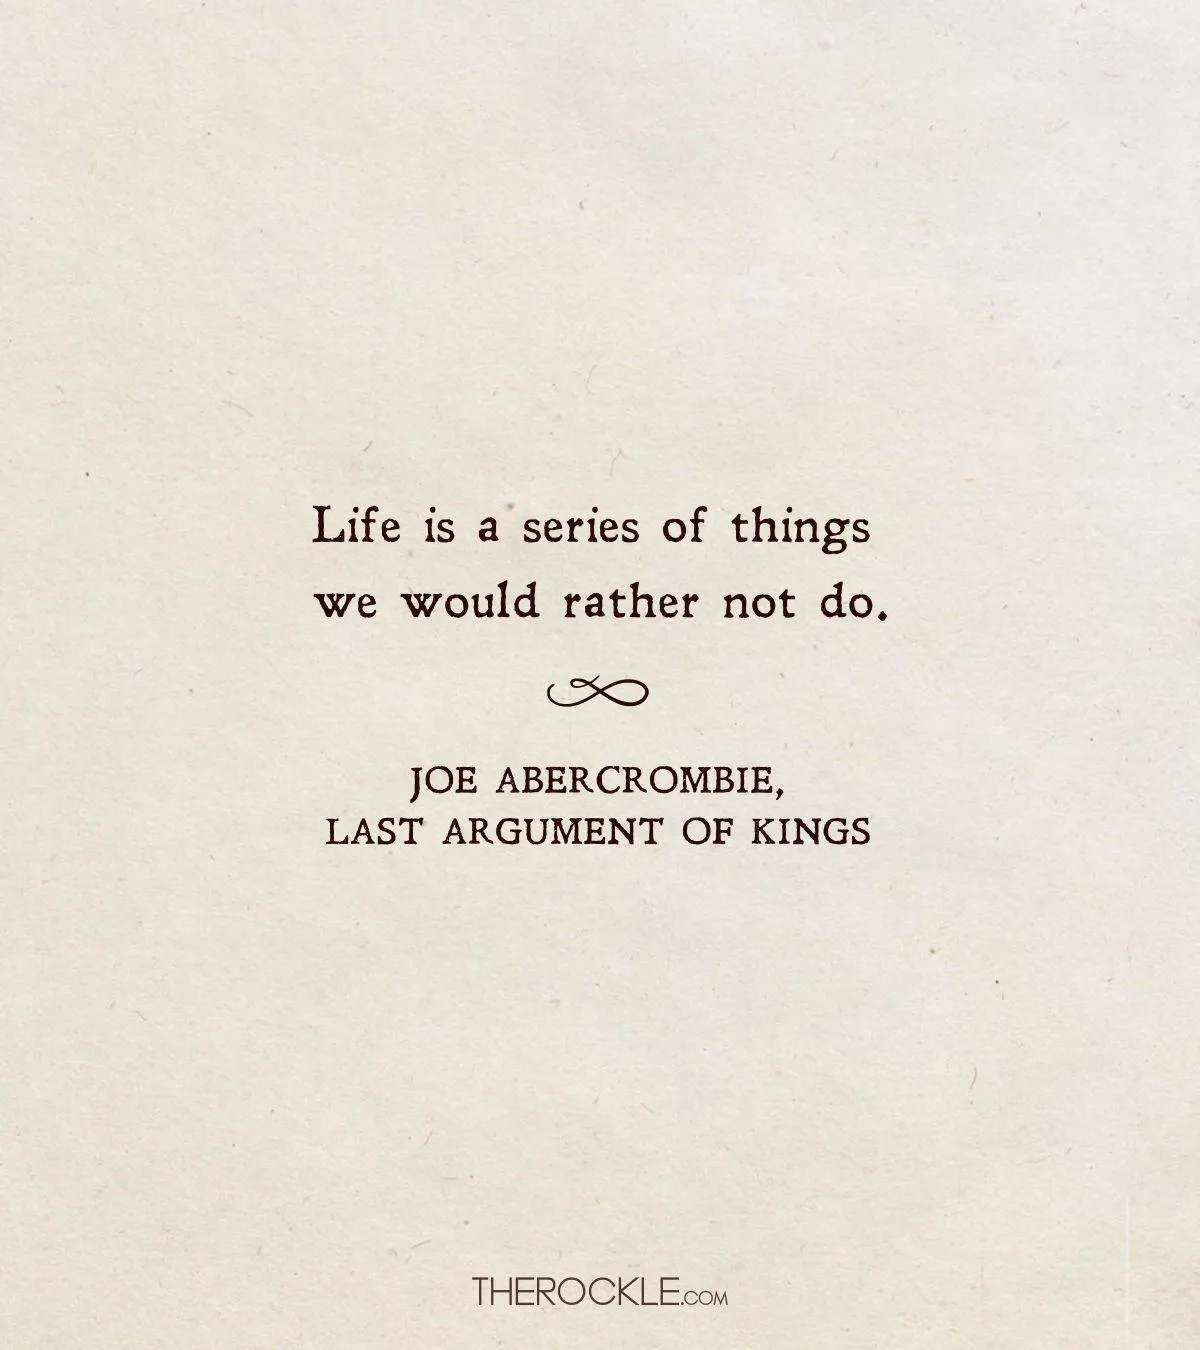 Joe Abercrombie quote on challenges in life